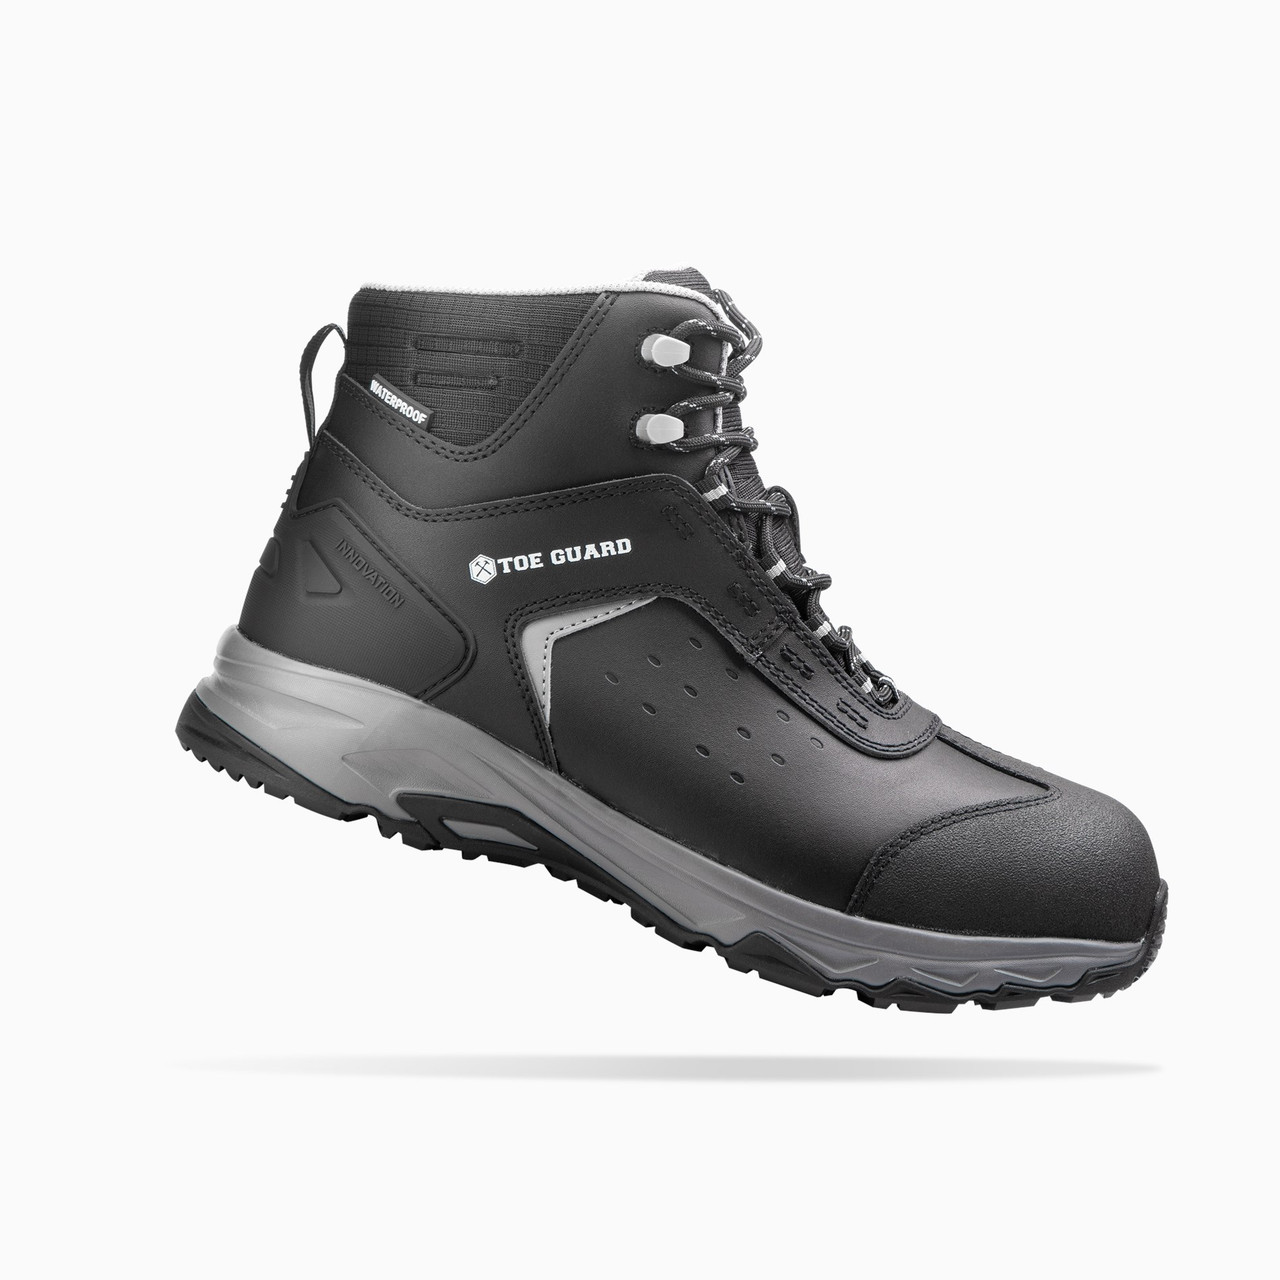 Buy online in Australia and New Zealand a TOE Guard Metal Free Safety Boots for Airport Ground Crew that perform exceptionally for Mechanical